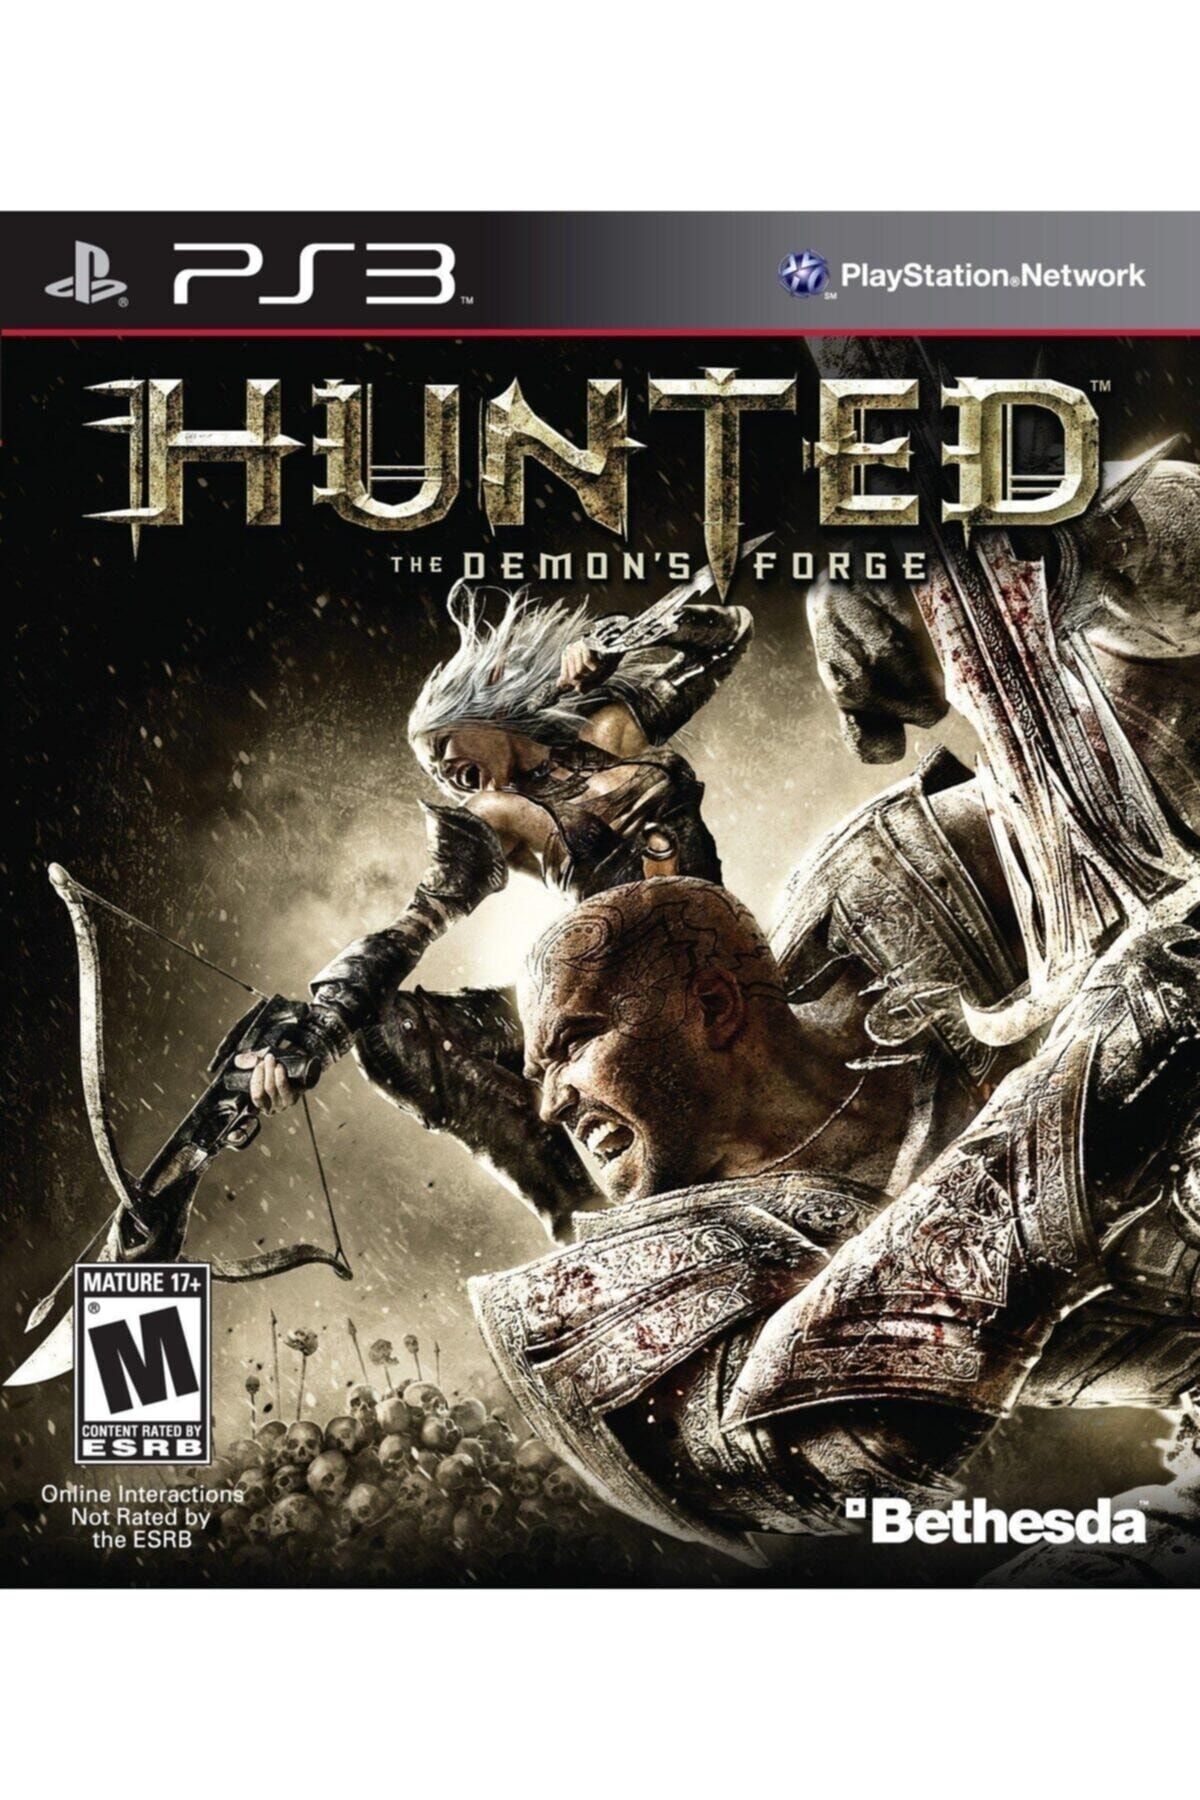 BETHESDA Ps3 Hunted The Demons Forge